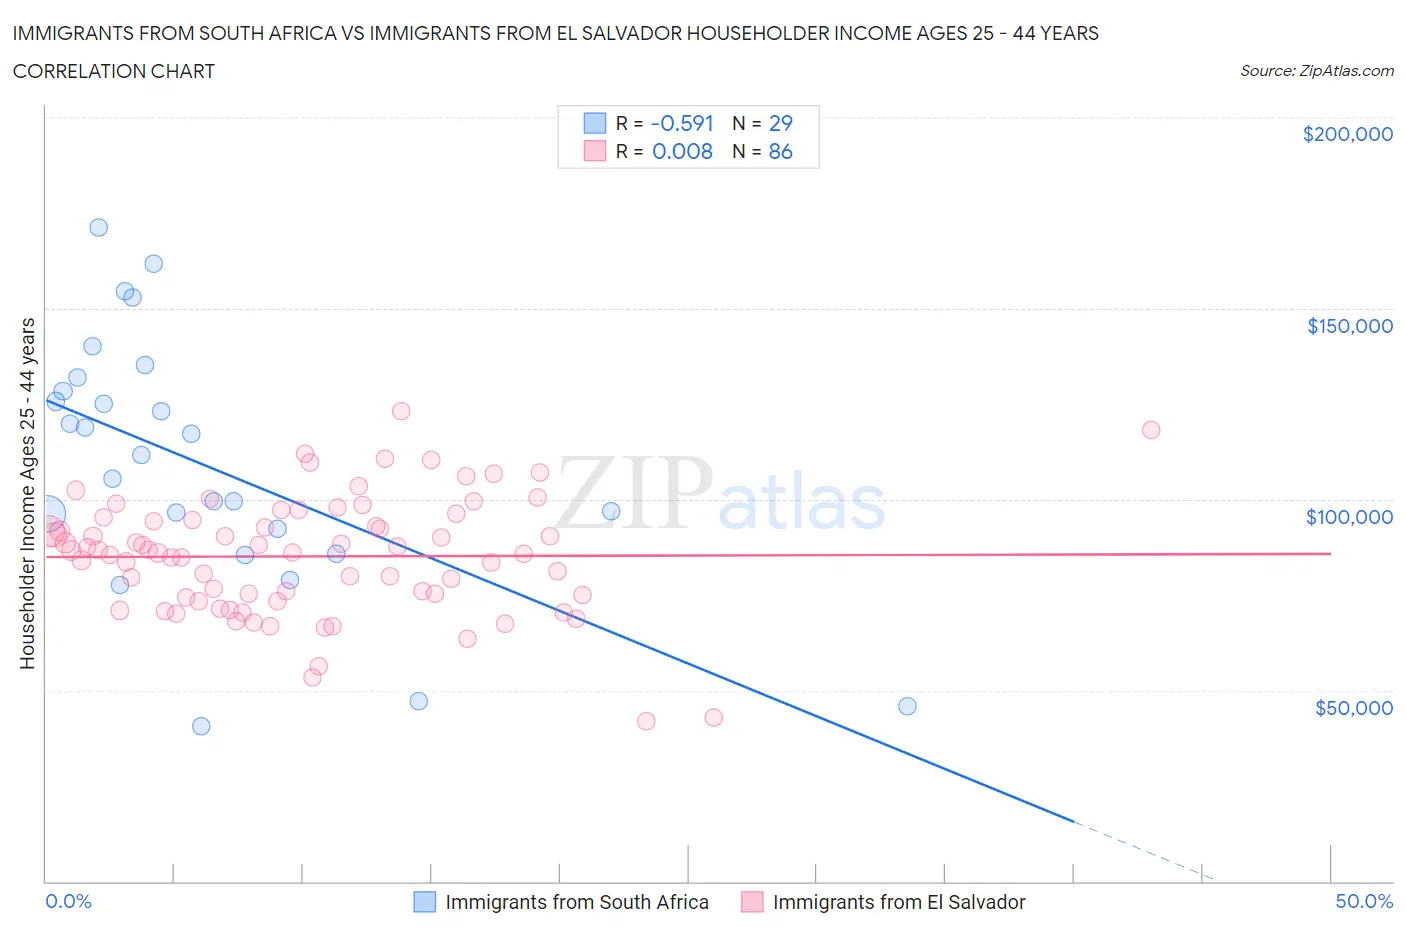 Immigrants from South Africa vs Immigrants from El Salvador Householder Income Ages 25 - 44 years